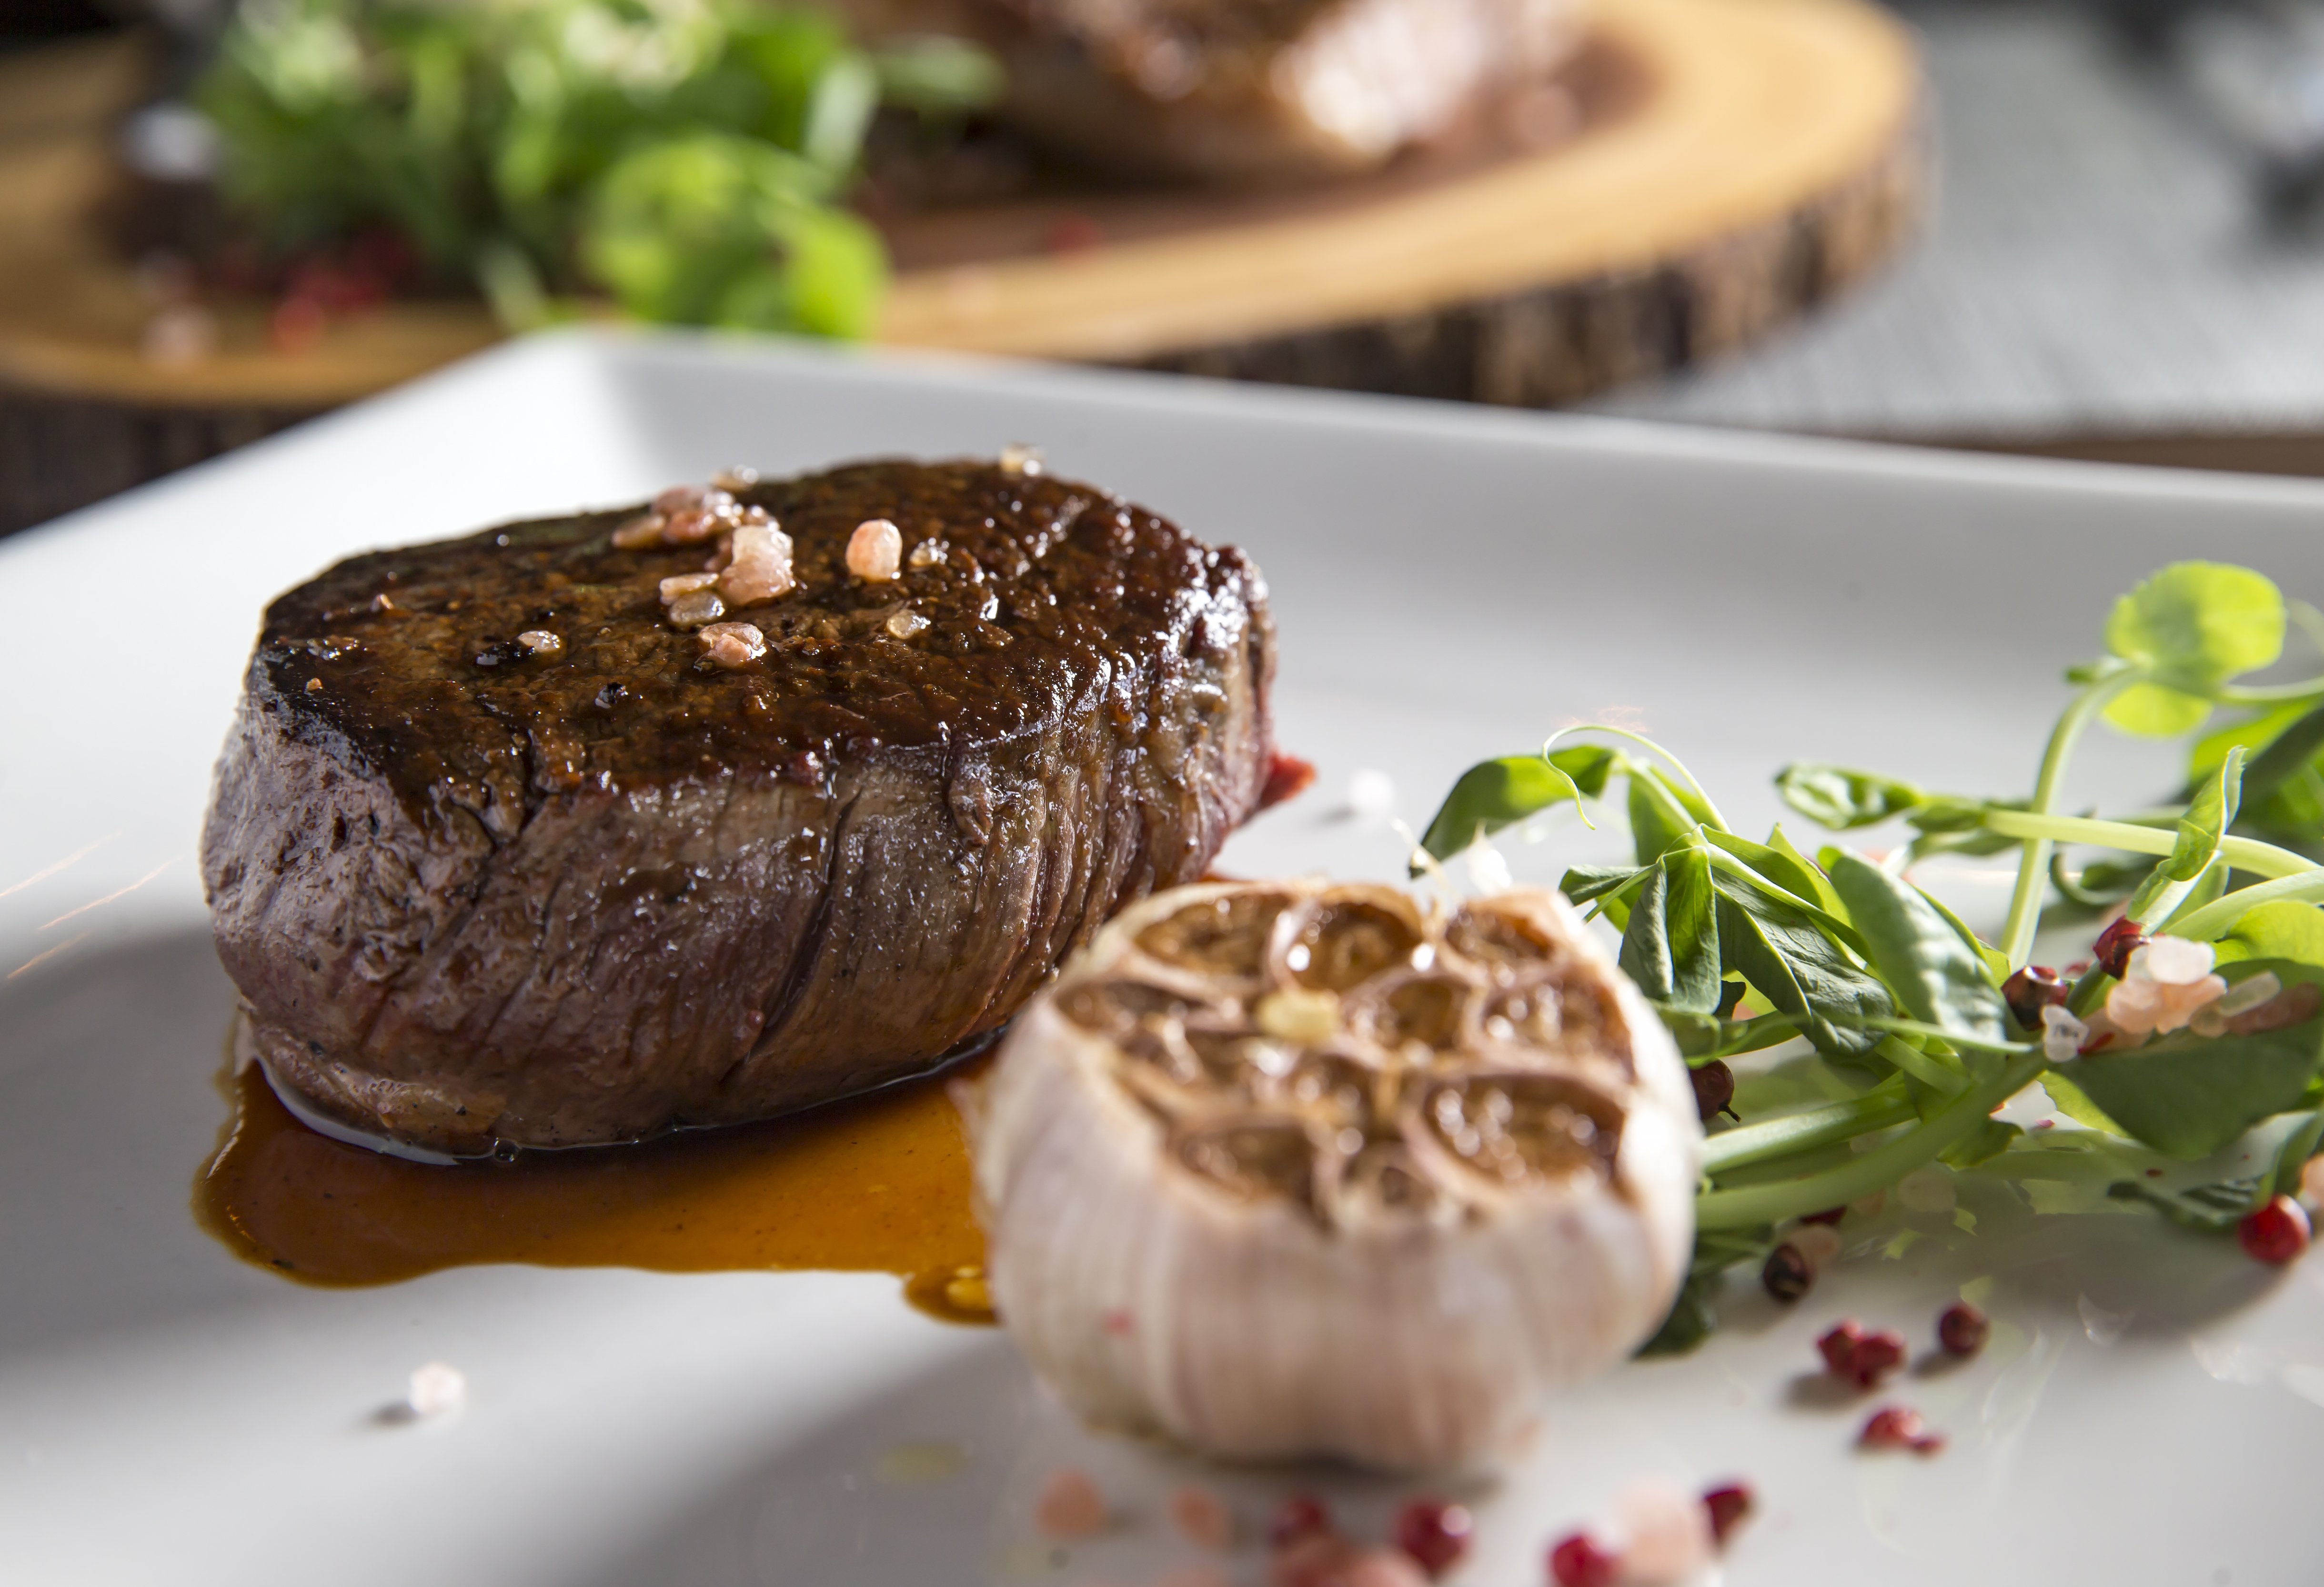 Visit to discover why Prime Steakhouse is the #1 rated Restaurant 